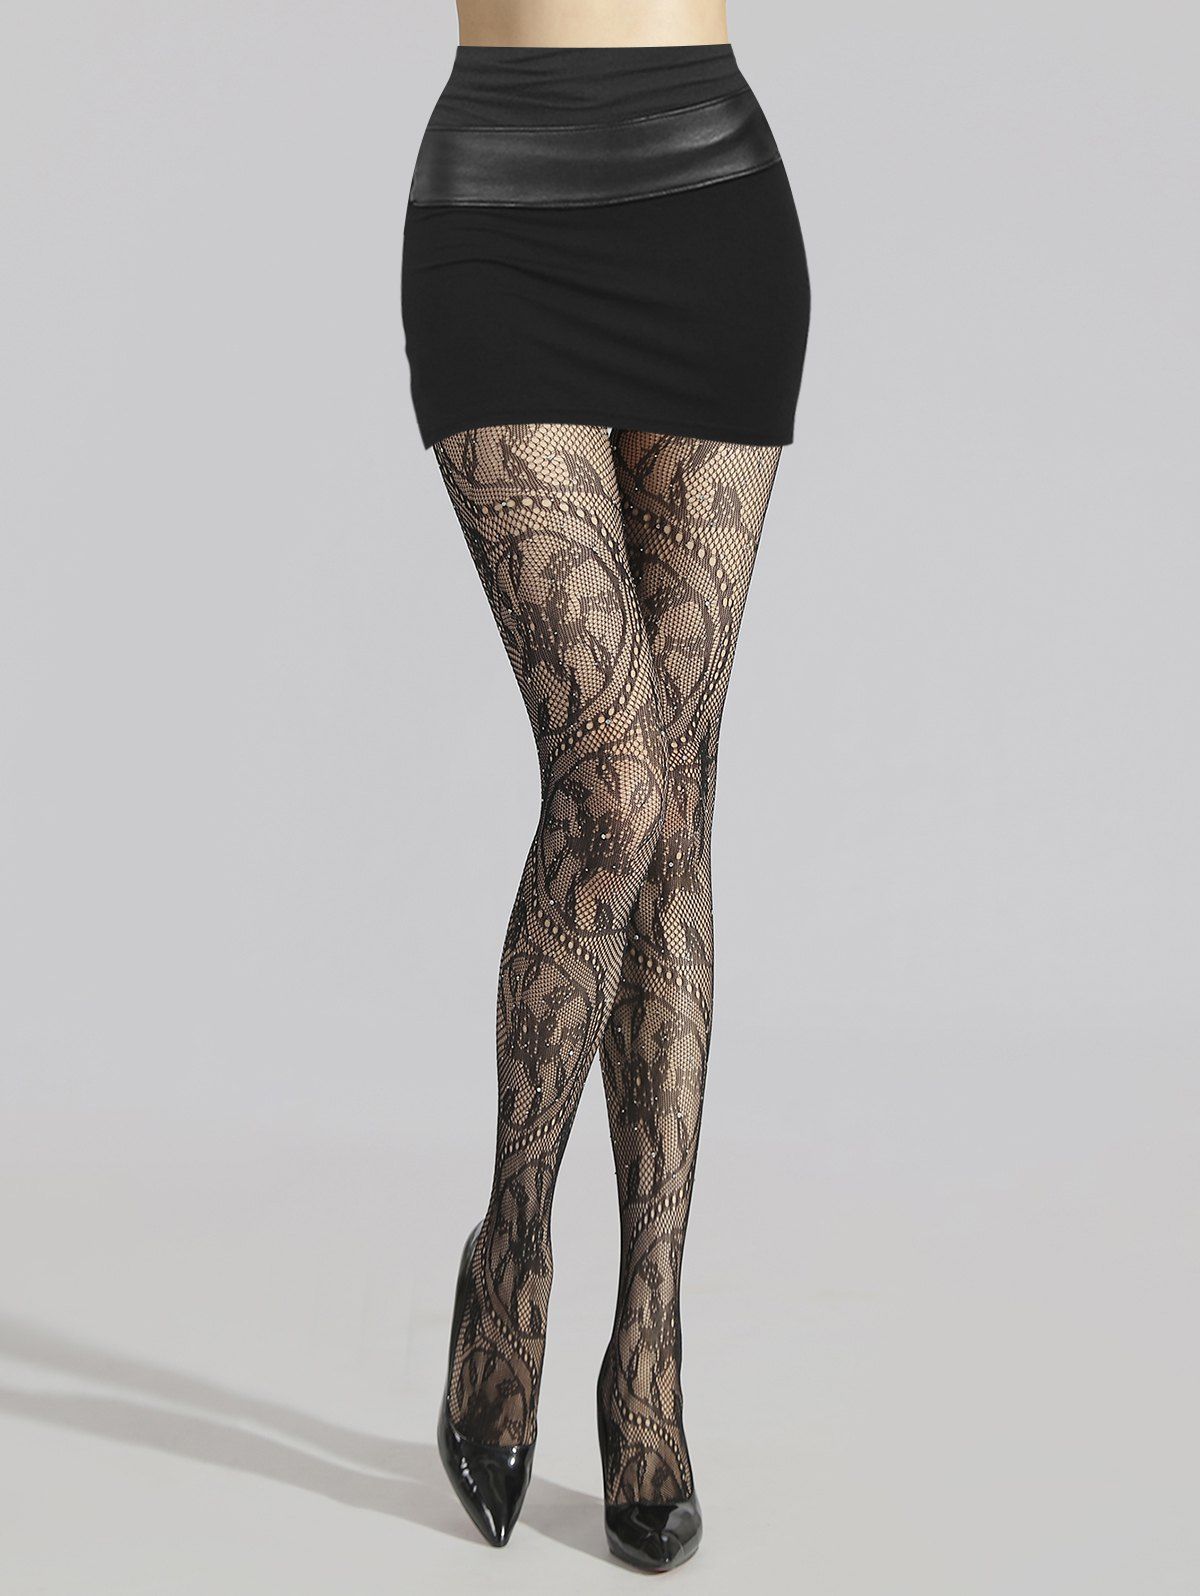 Sheer Pantyhose Printed Rhinestone High Waist Lace Hollow Out Long Stockings - BLACK ONE SIZE